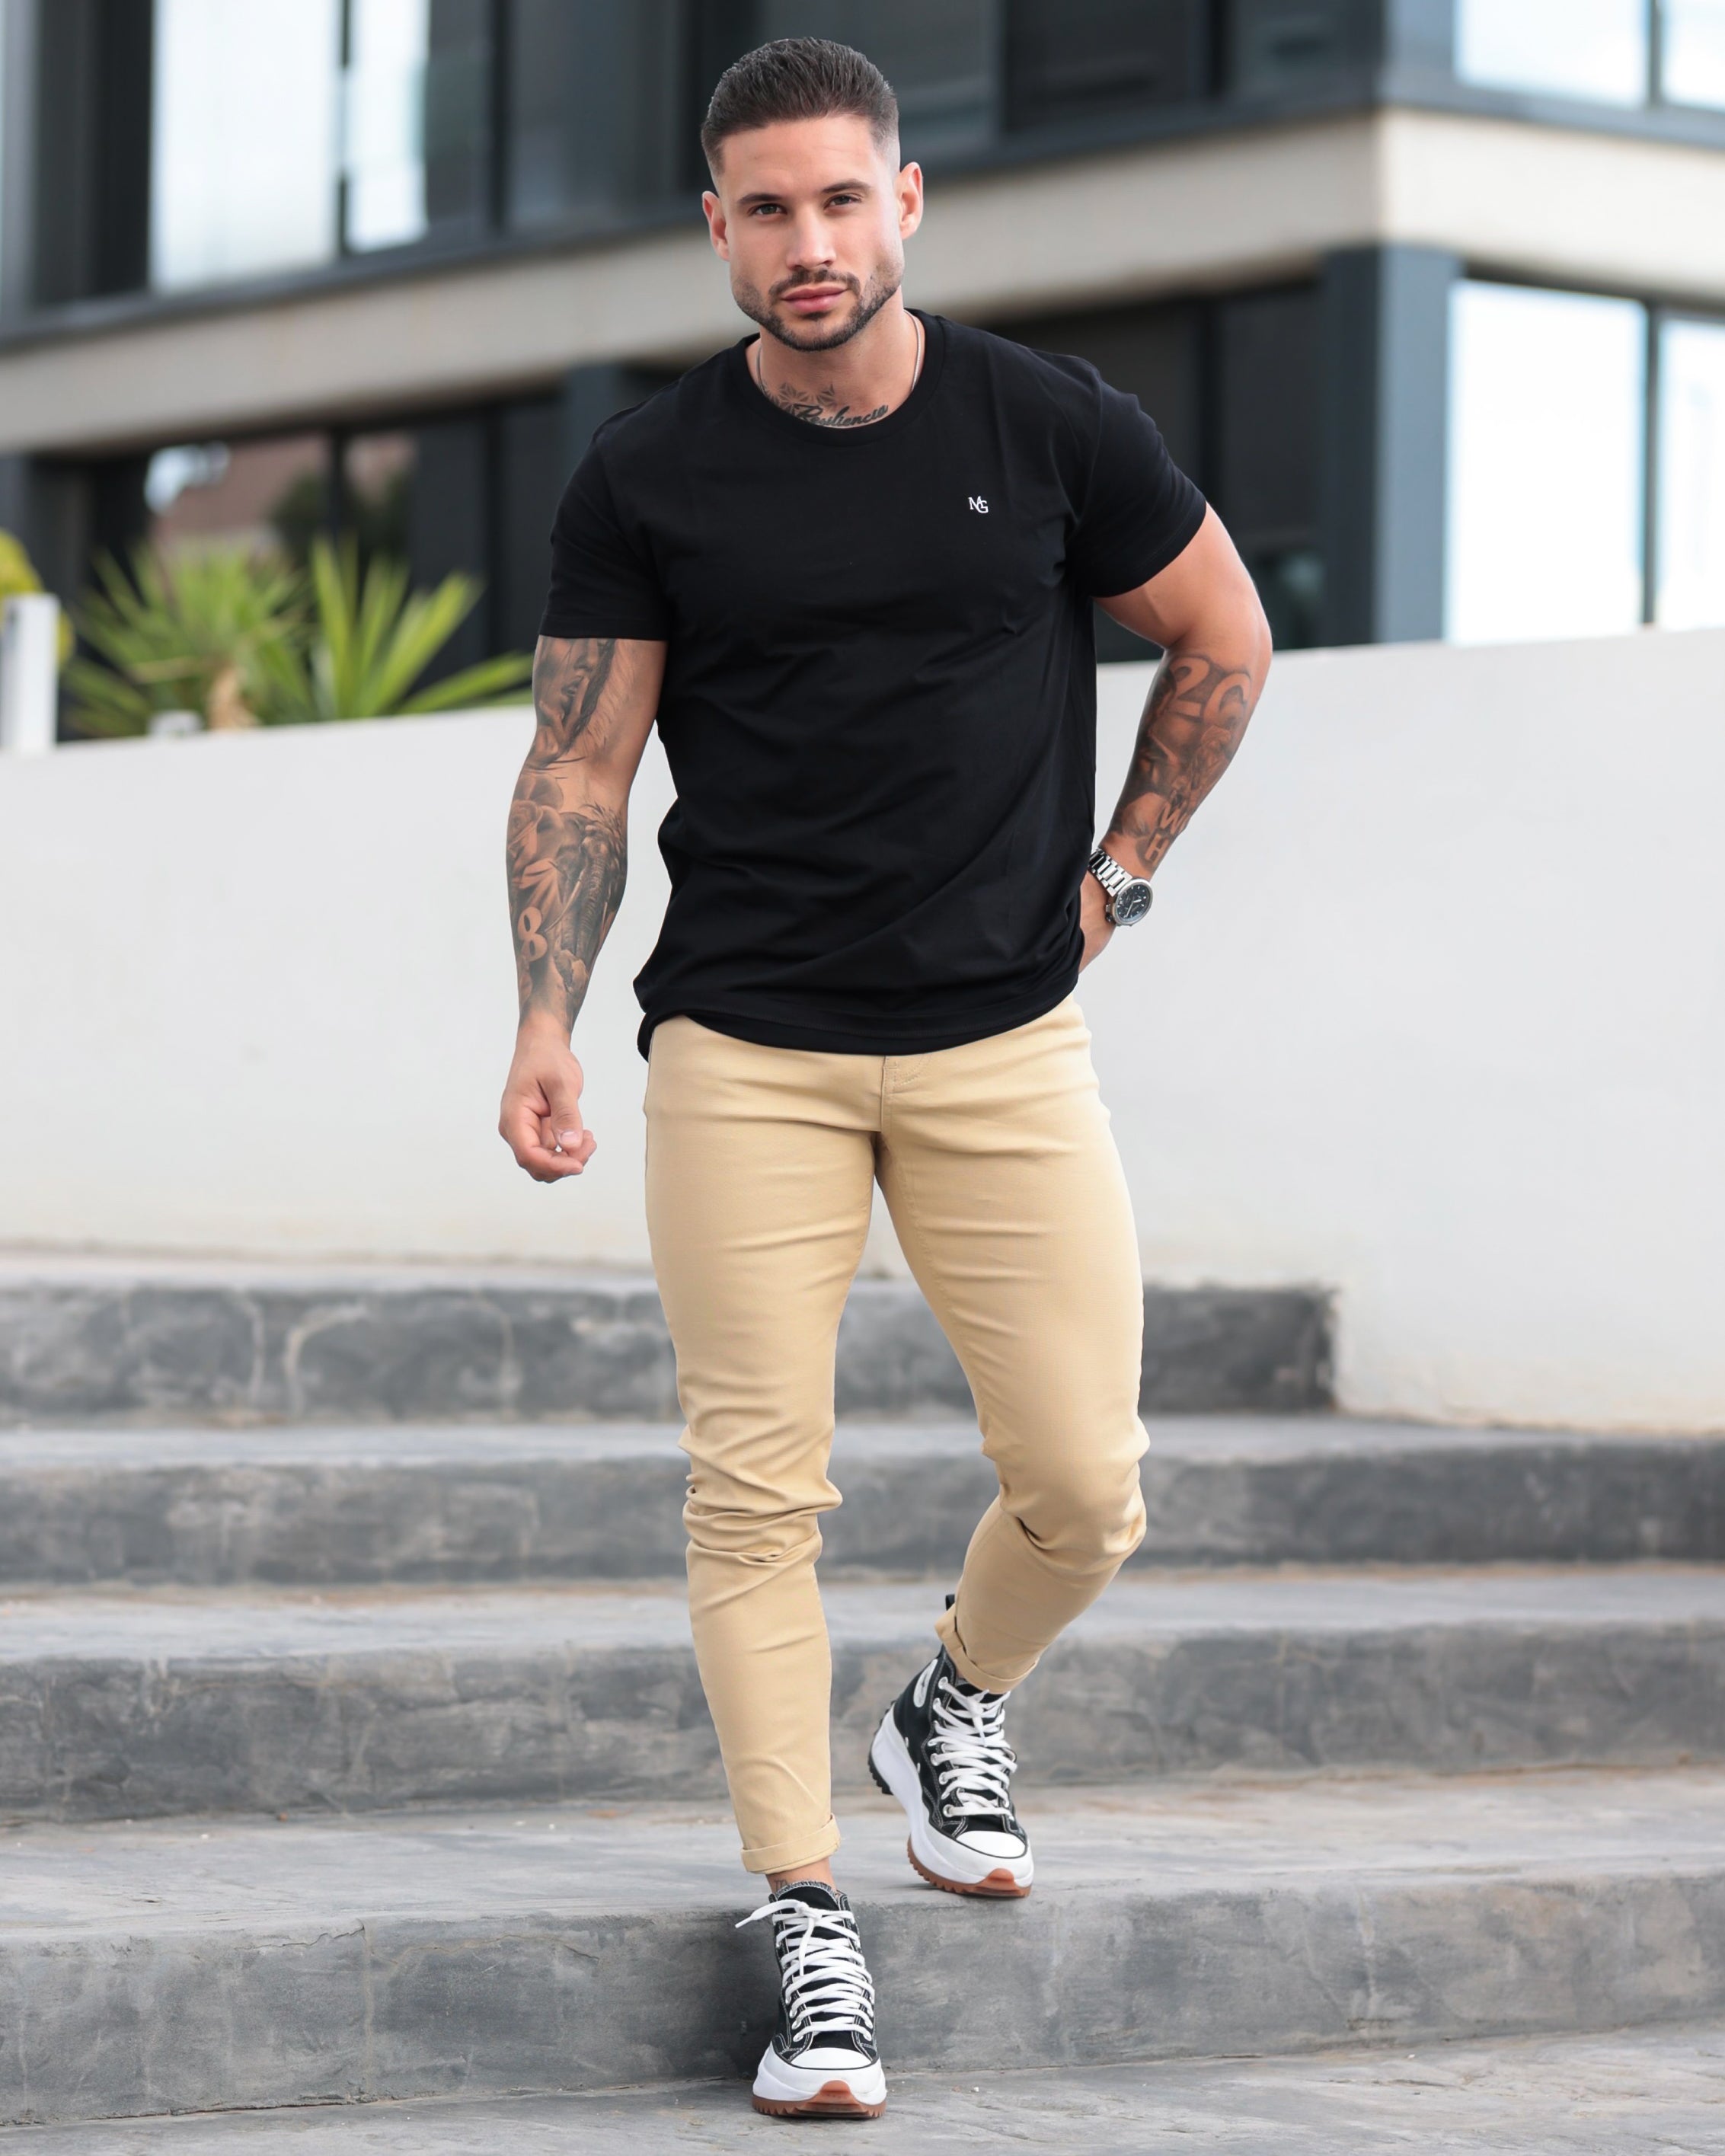 THE MADRID JEANS | BEIGE